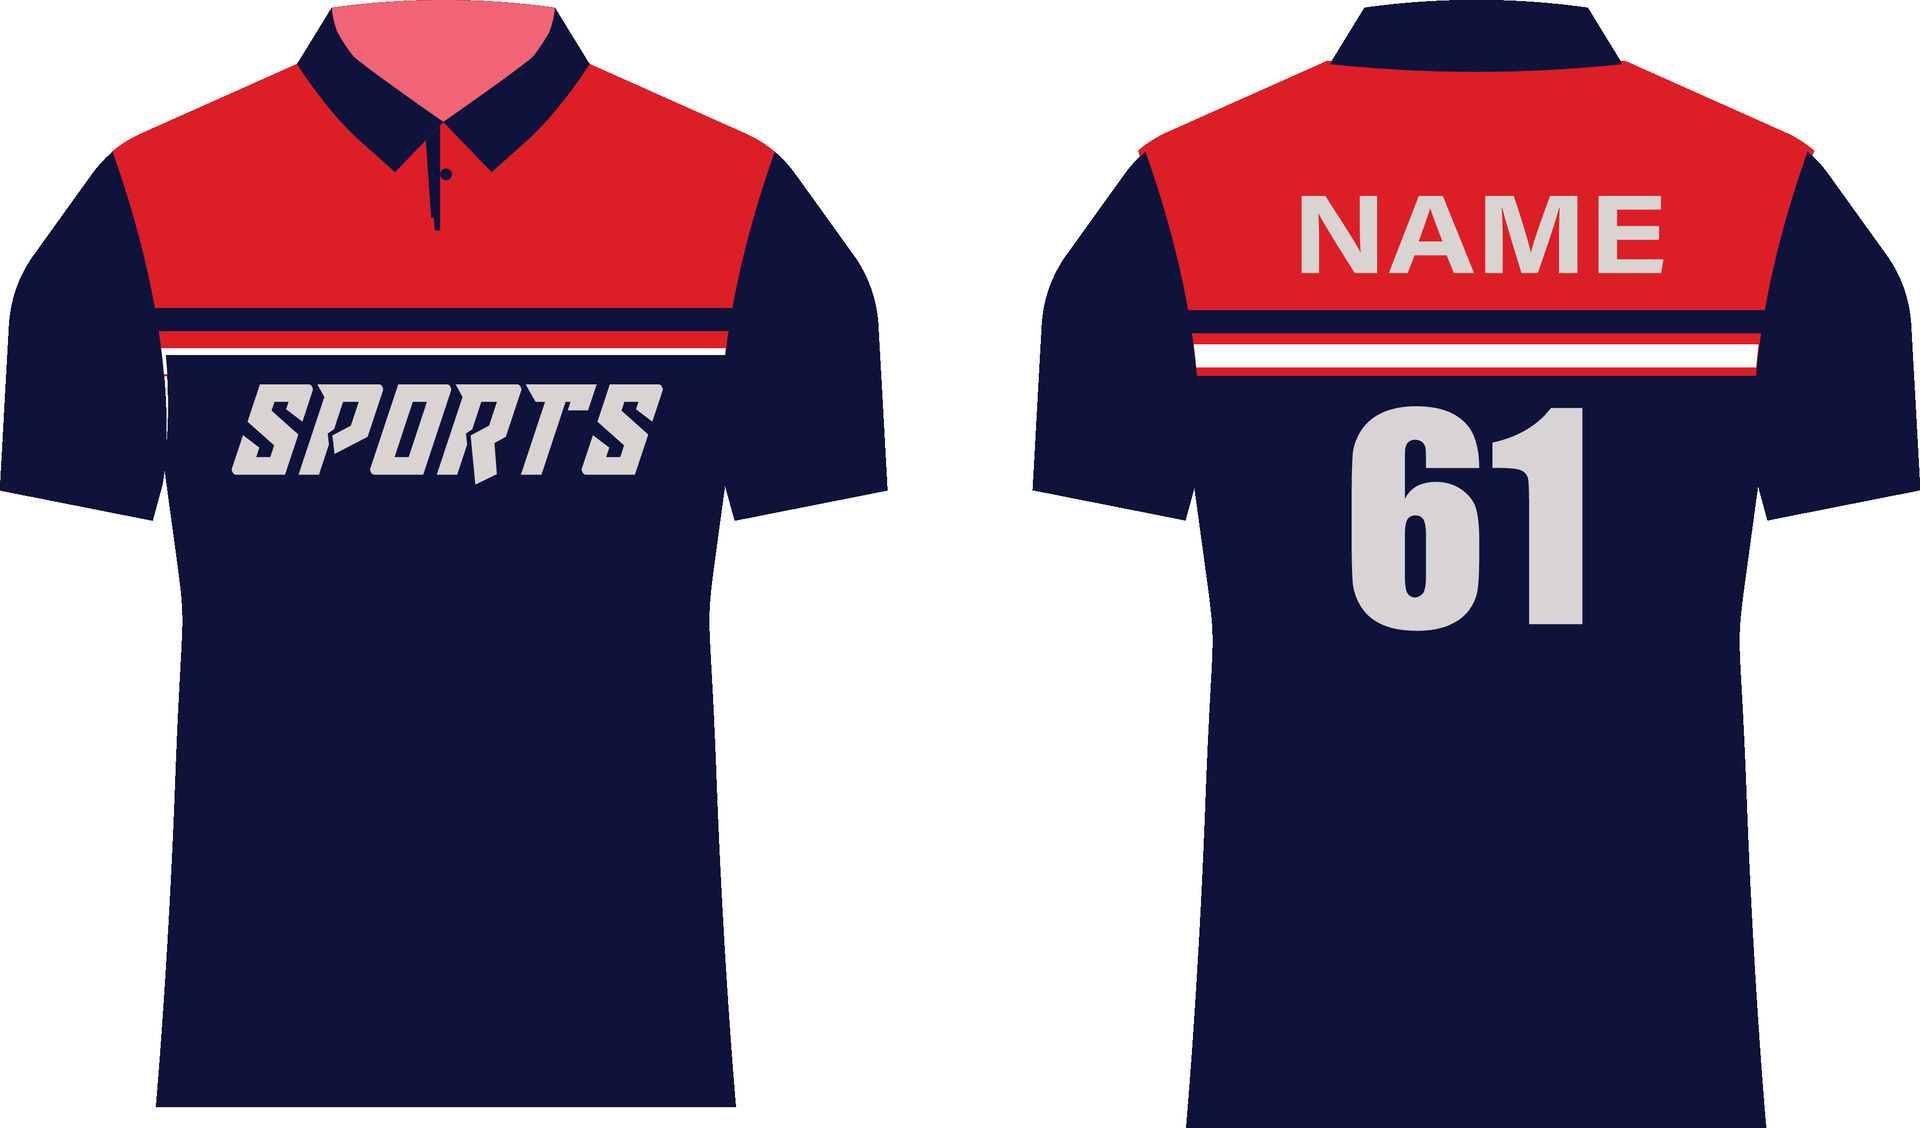 Sports Tshirt Jersey Design Vector Template Sports Jersey Concept